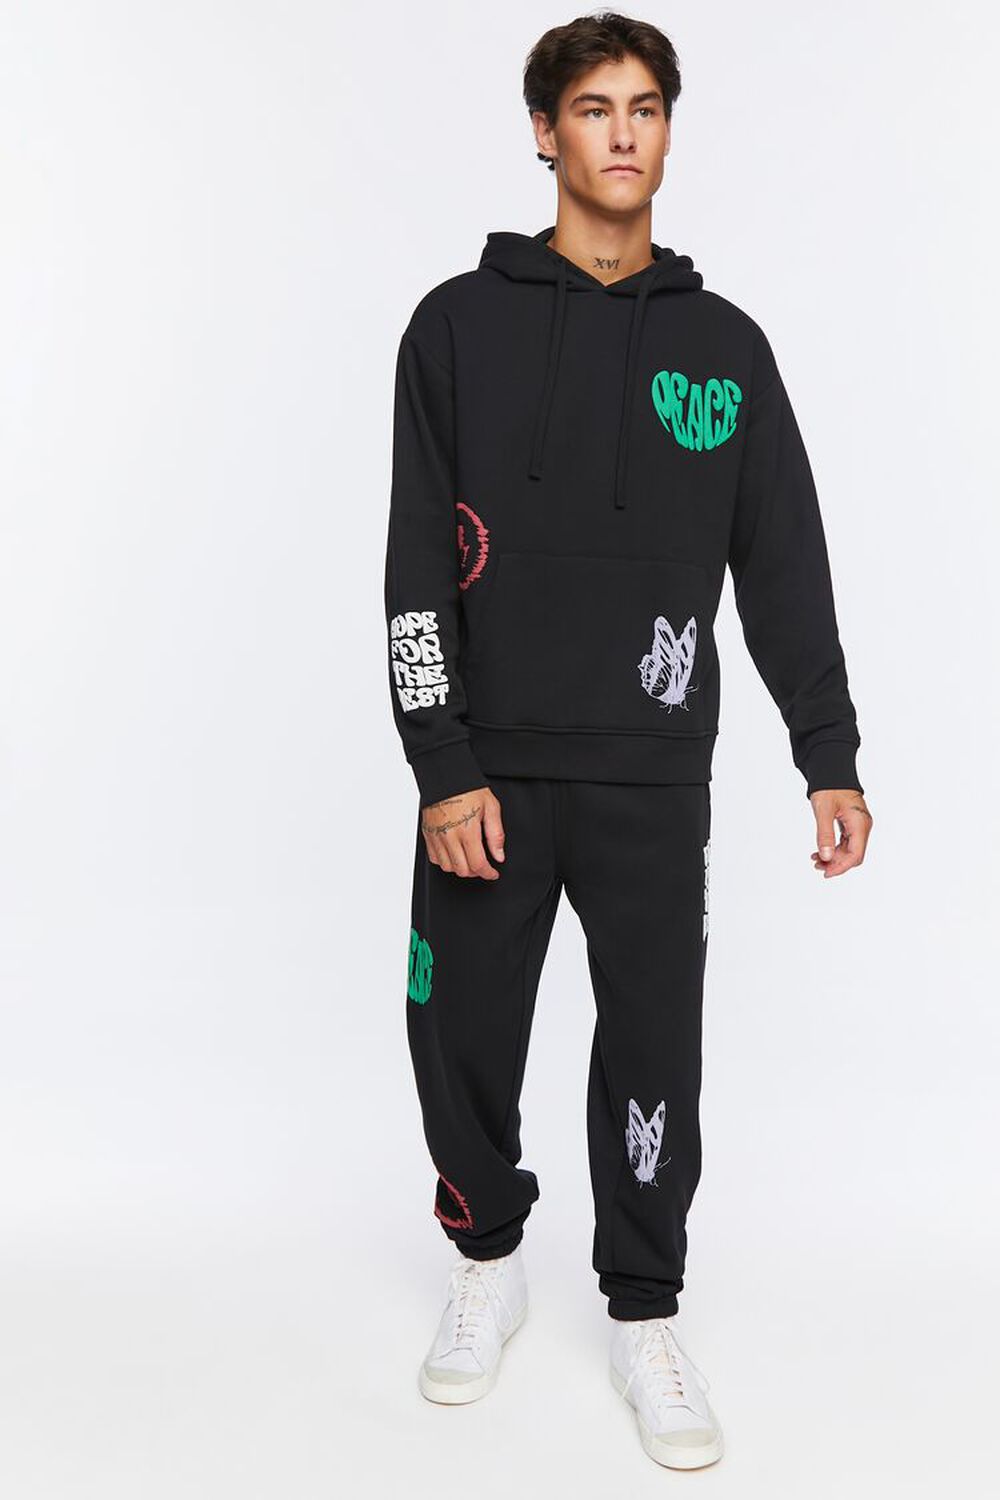 BLACK/MULTI Hope For The Best Graphic Joggers, image 1